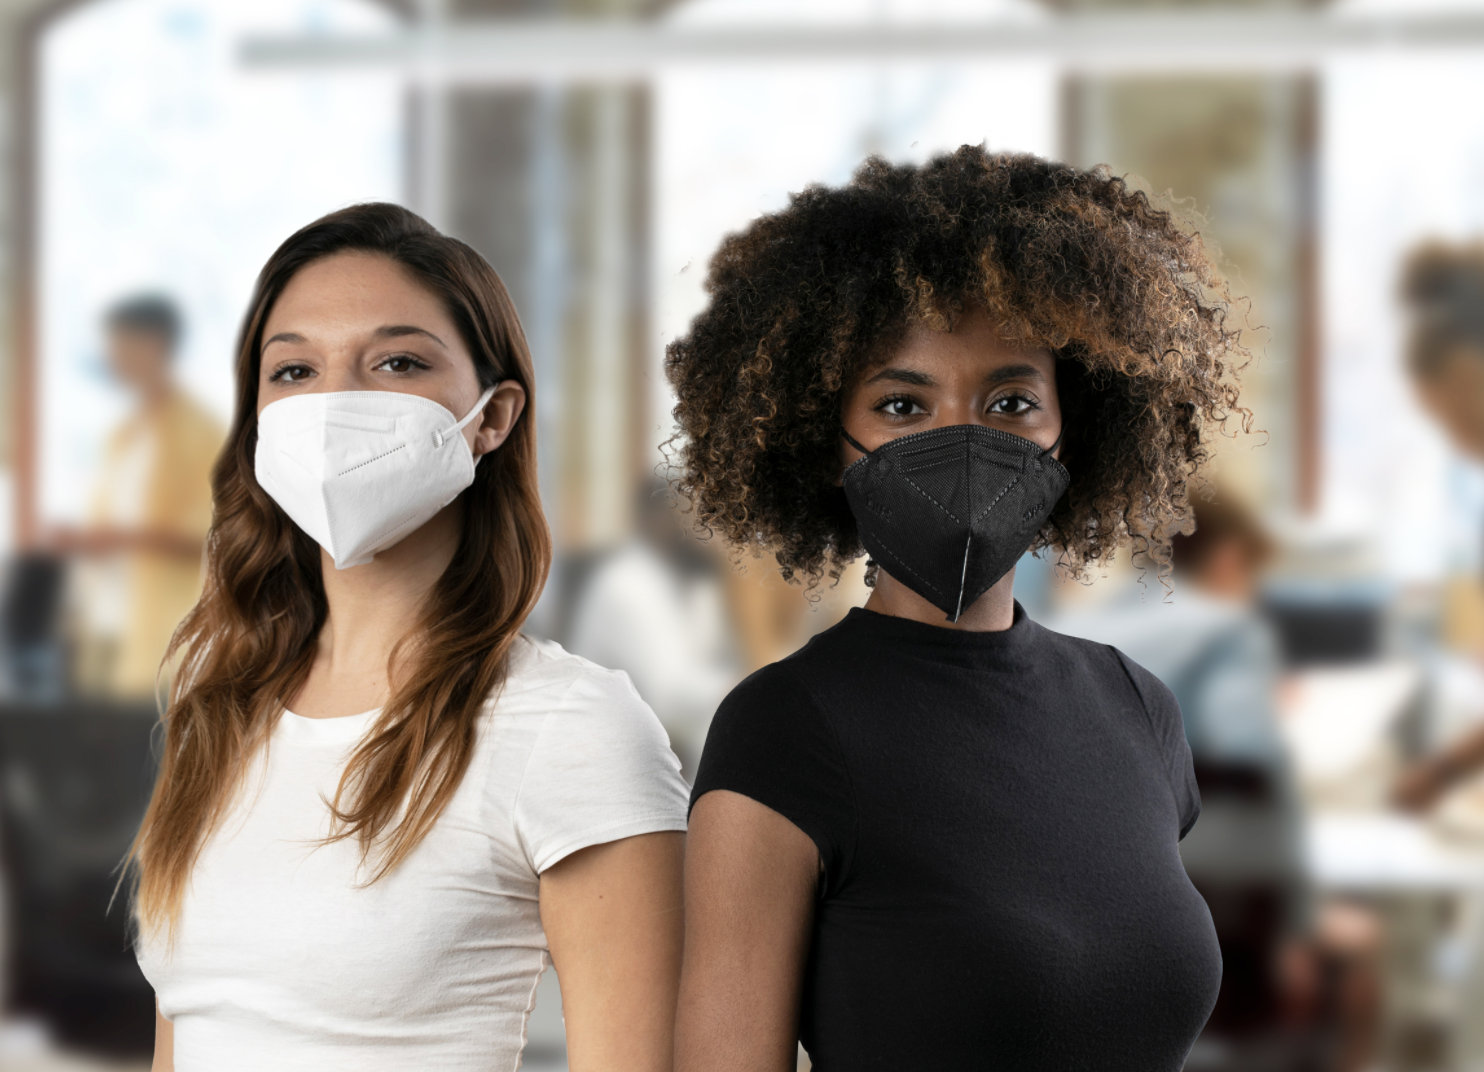 Two people stand side-by-side in an office while wearing masks